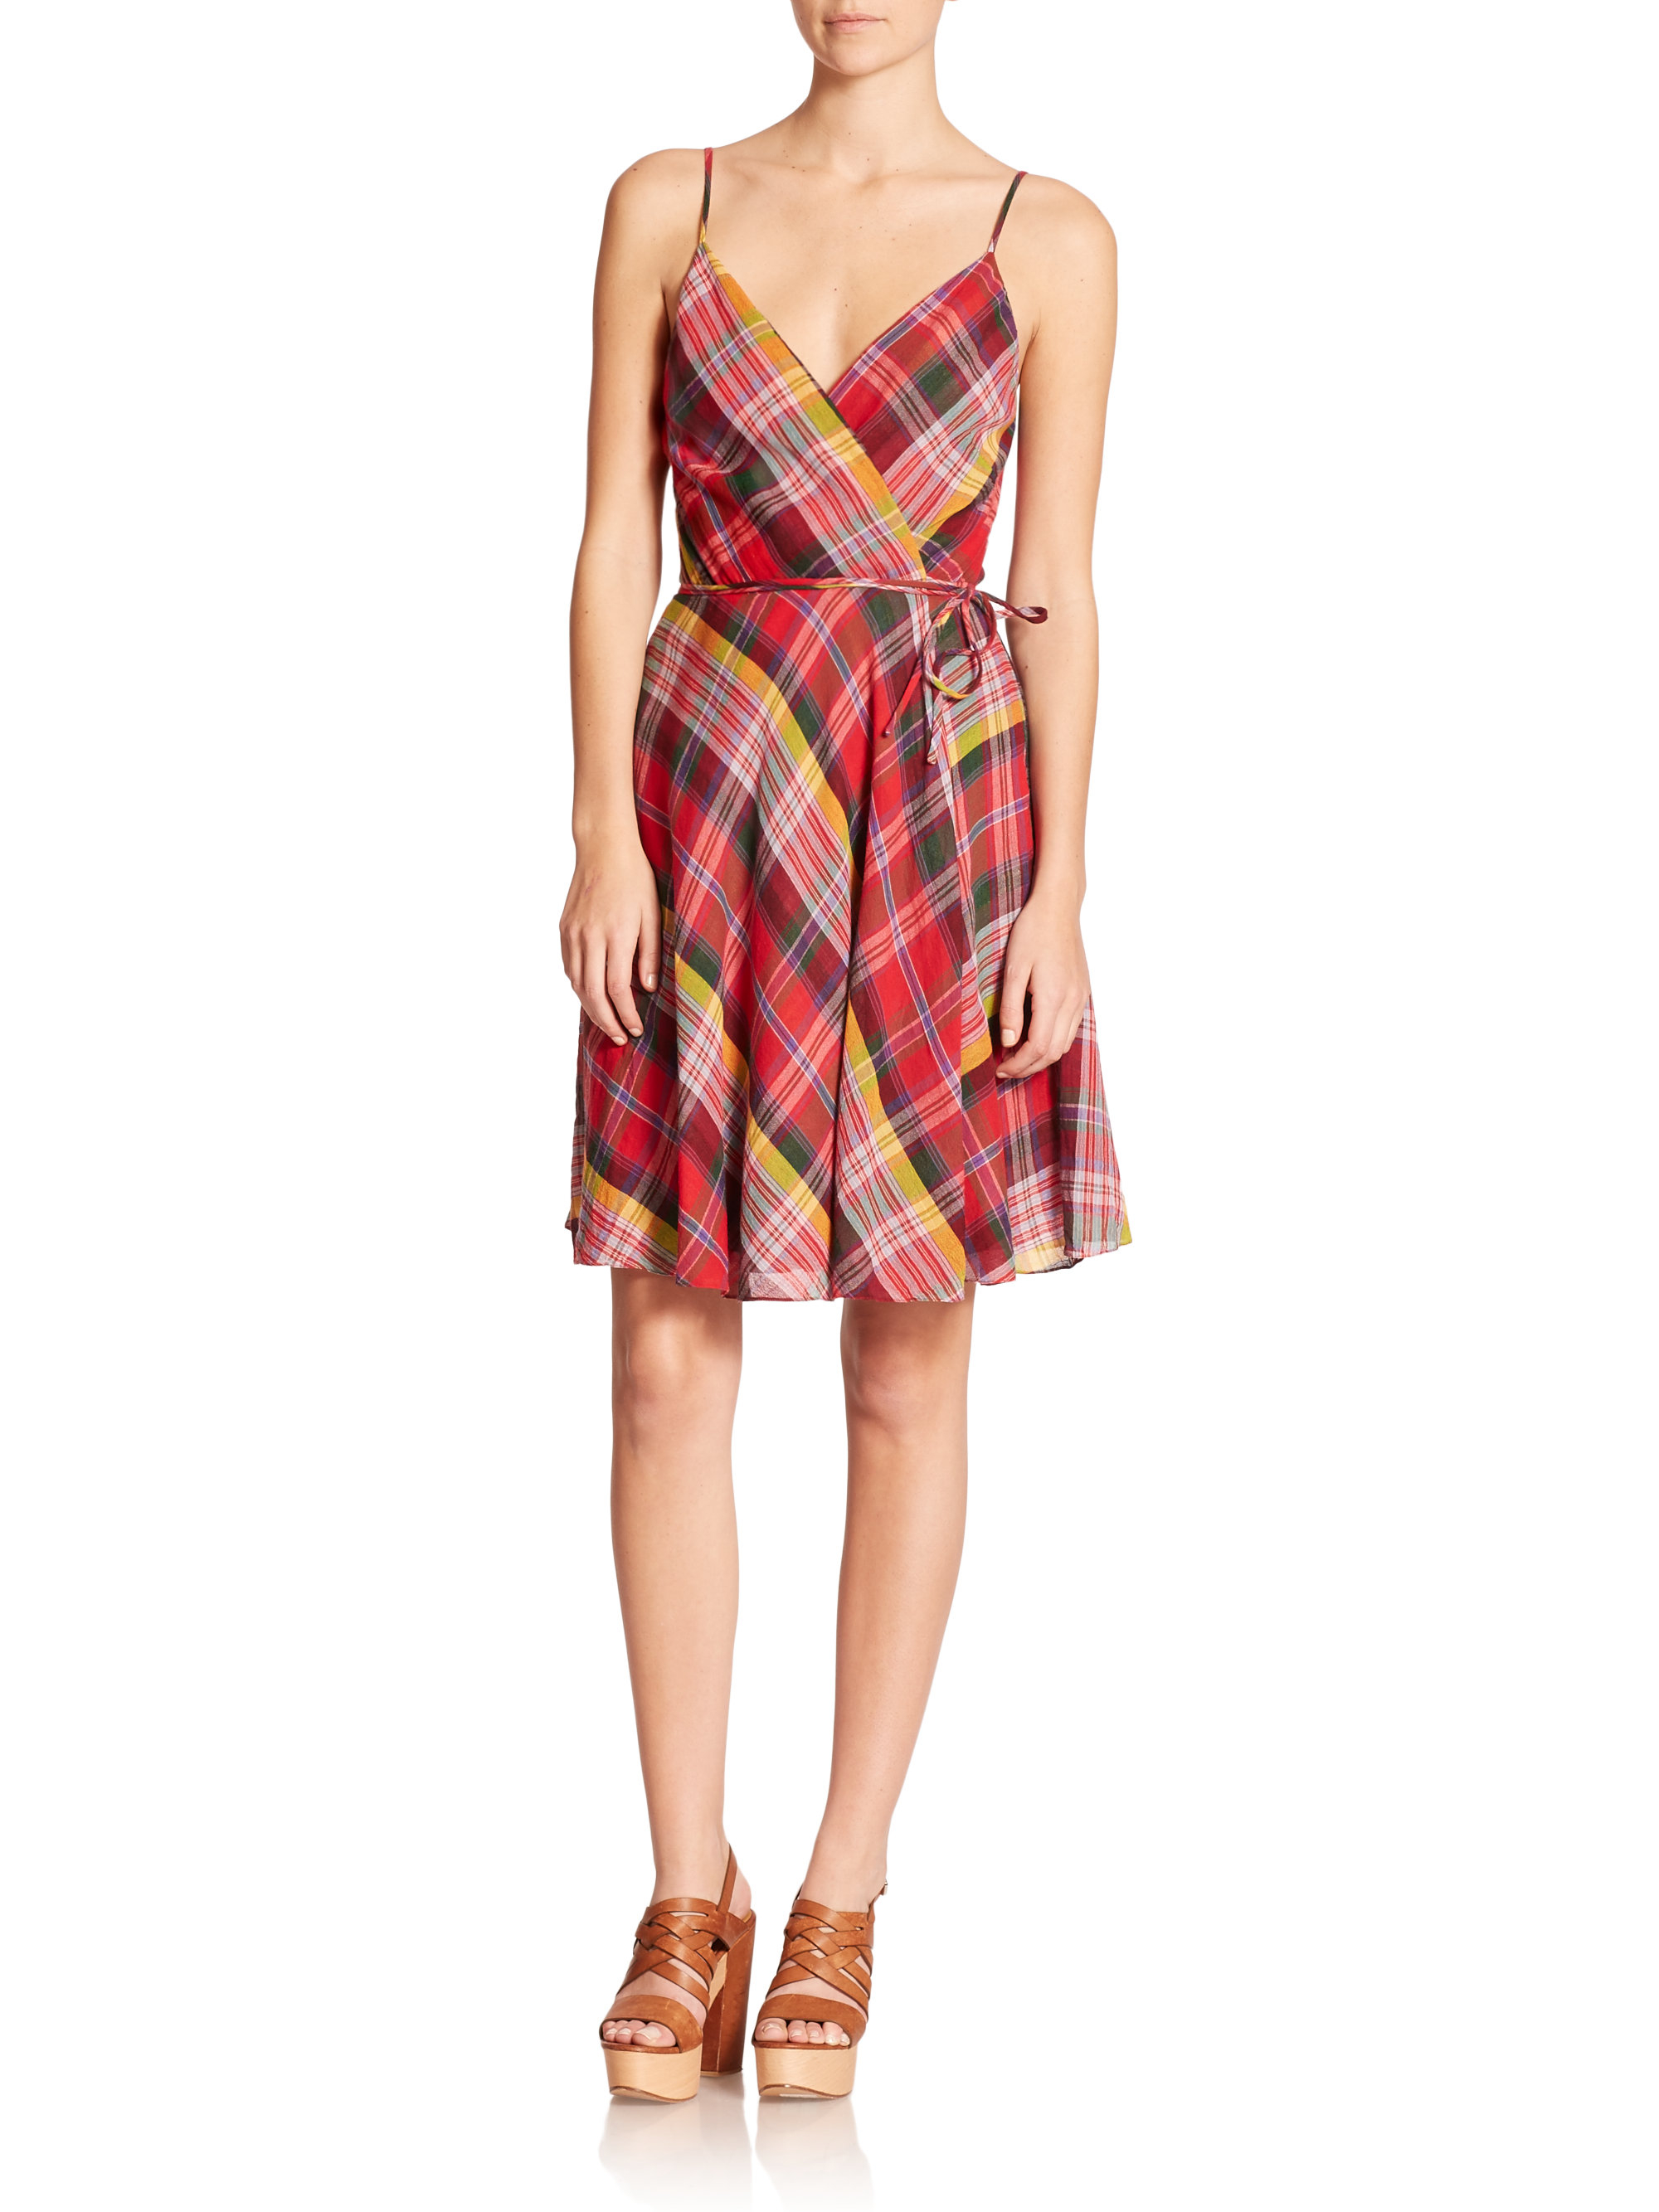 Lyst - Polo Ralph Lauren Plaid Wrap Dress in Red